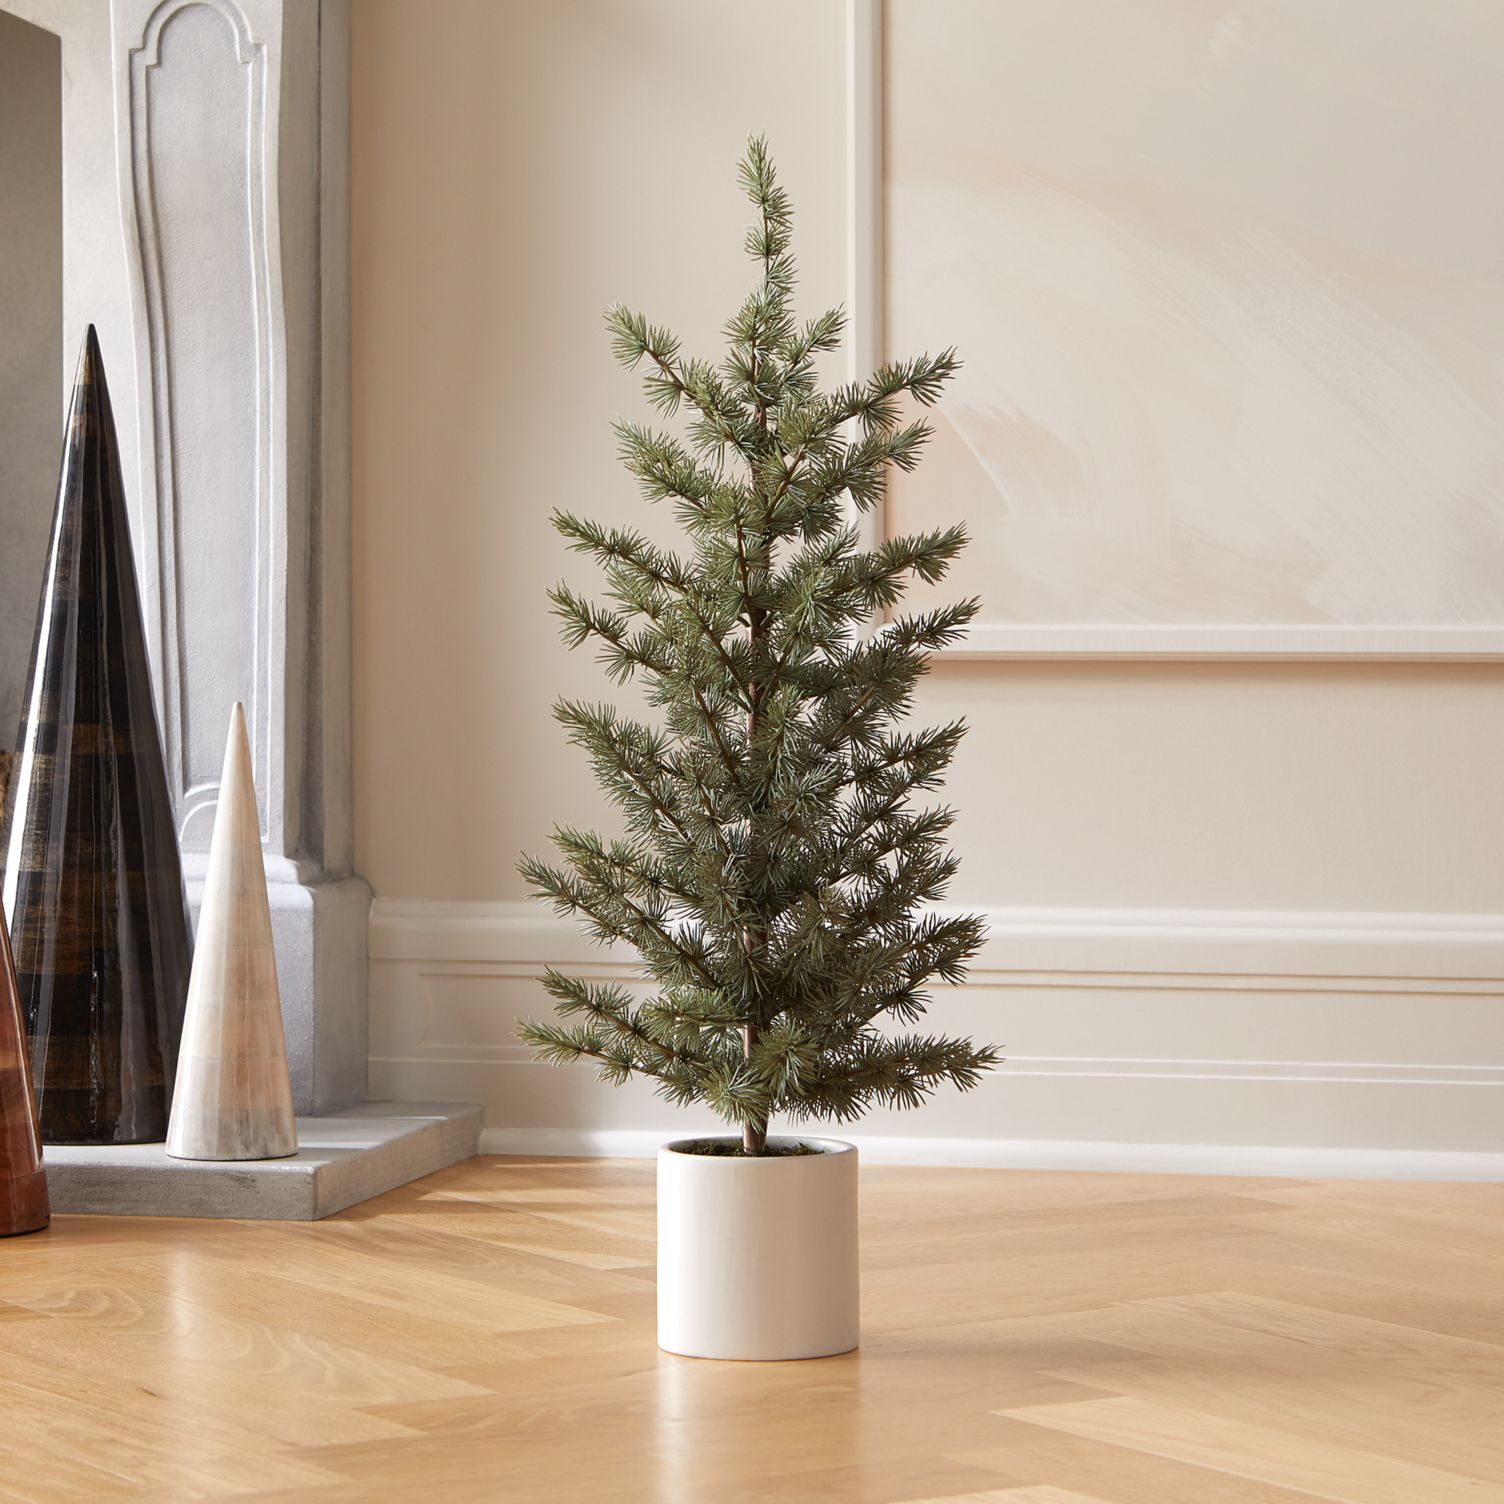 Potted pine tree from CB2